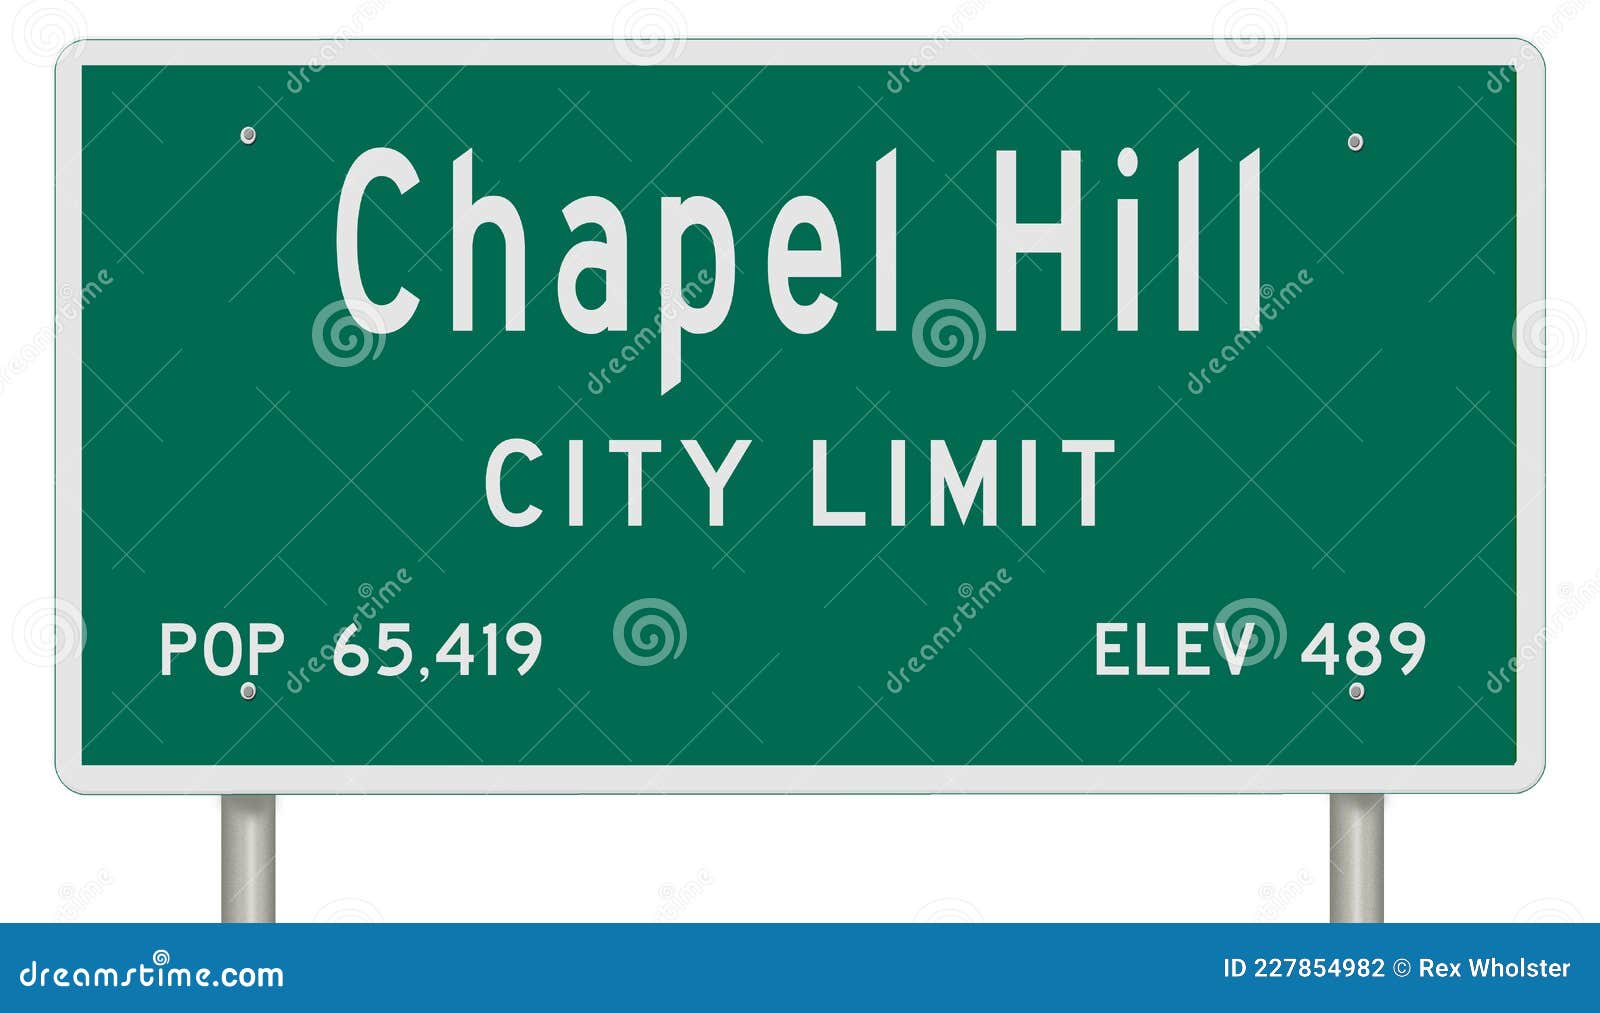 Chapel Hill Road Sign Showing Population and Elevation Stock ...